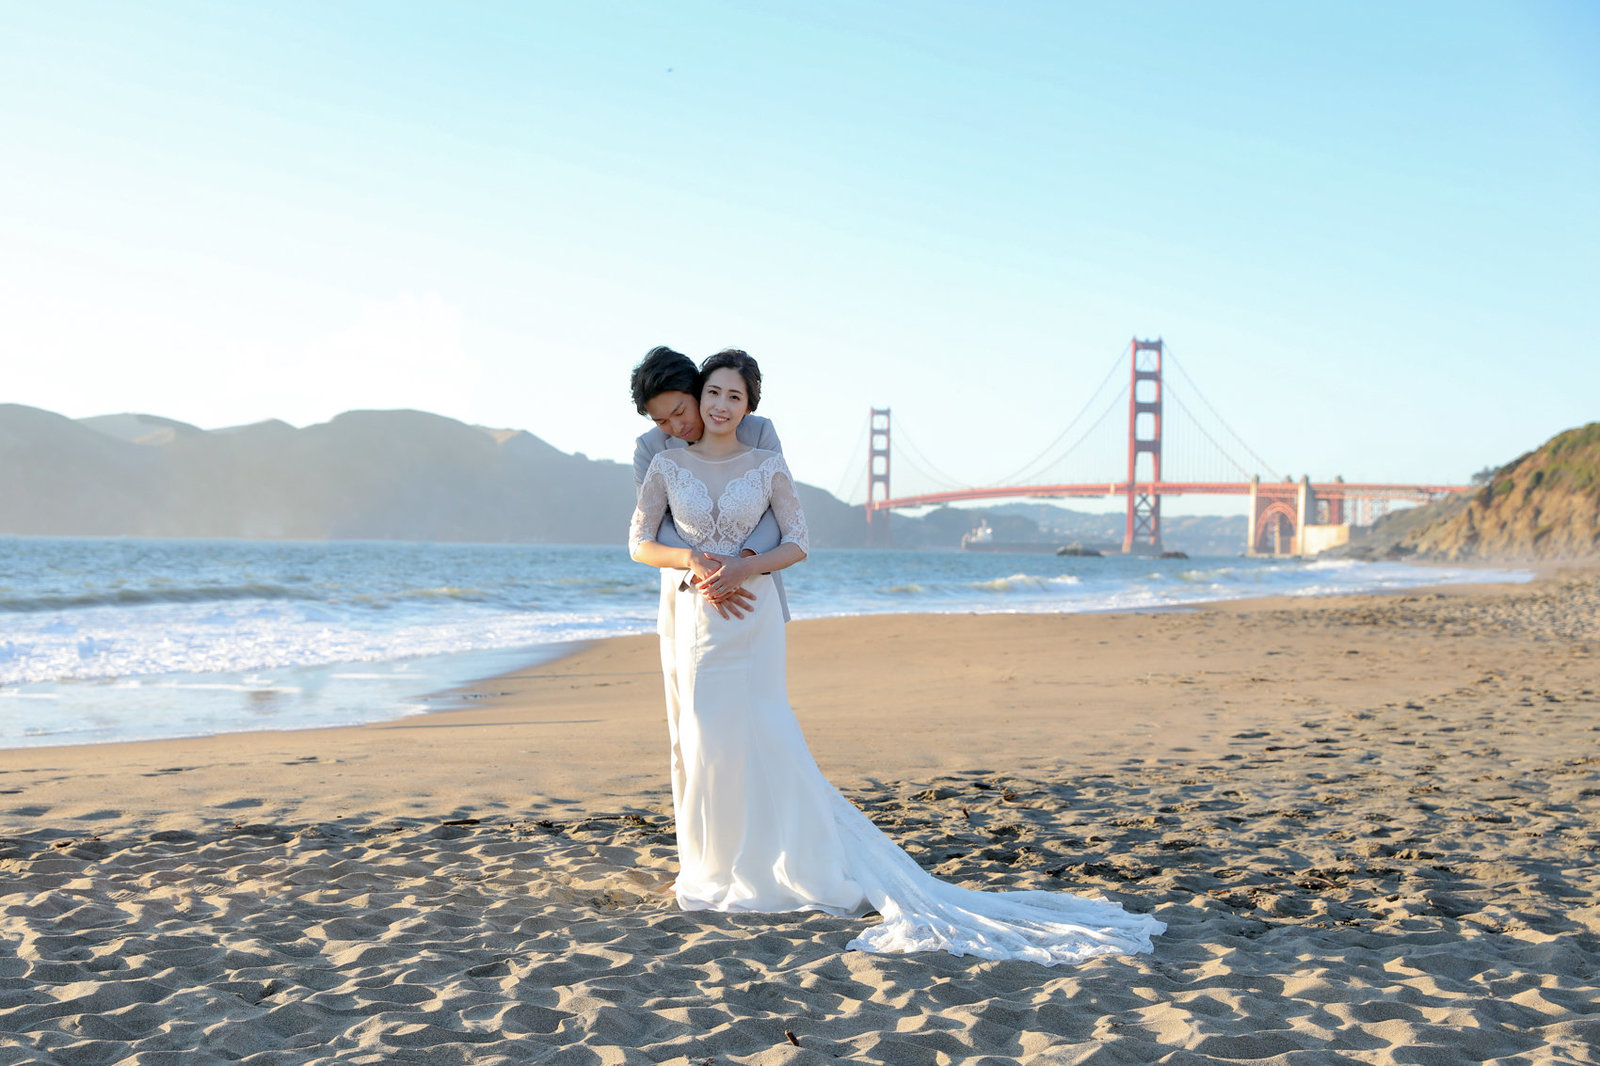 Engagement session for bride and groom at Sunset in San Francisco, California